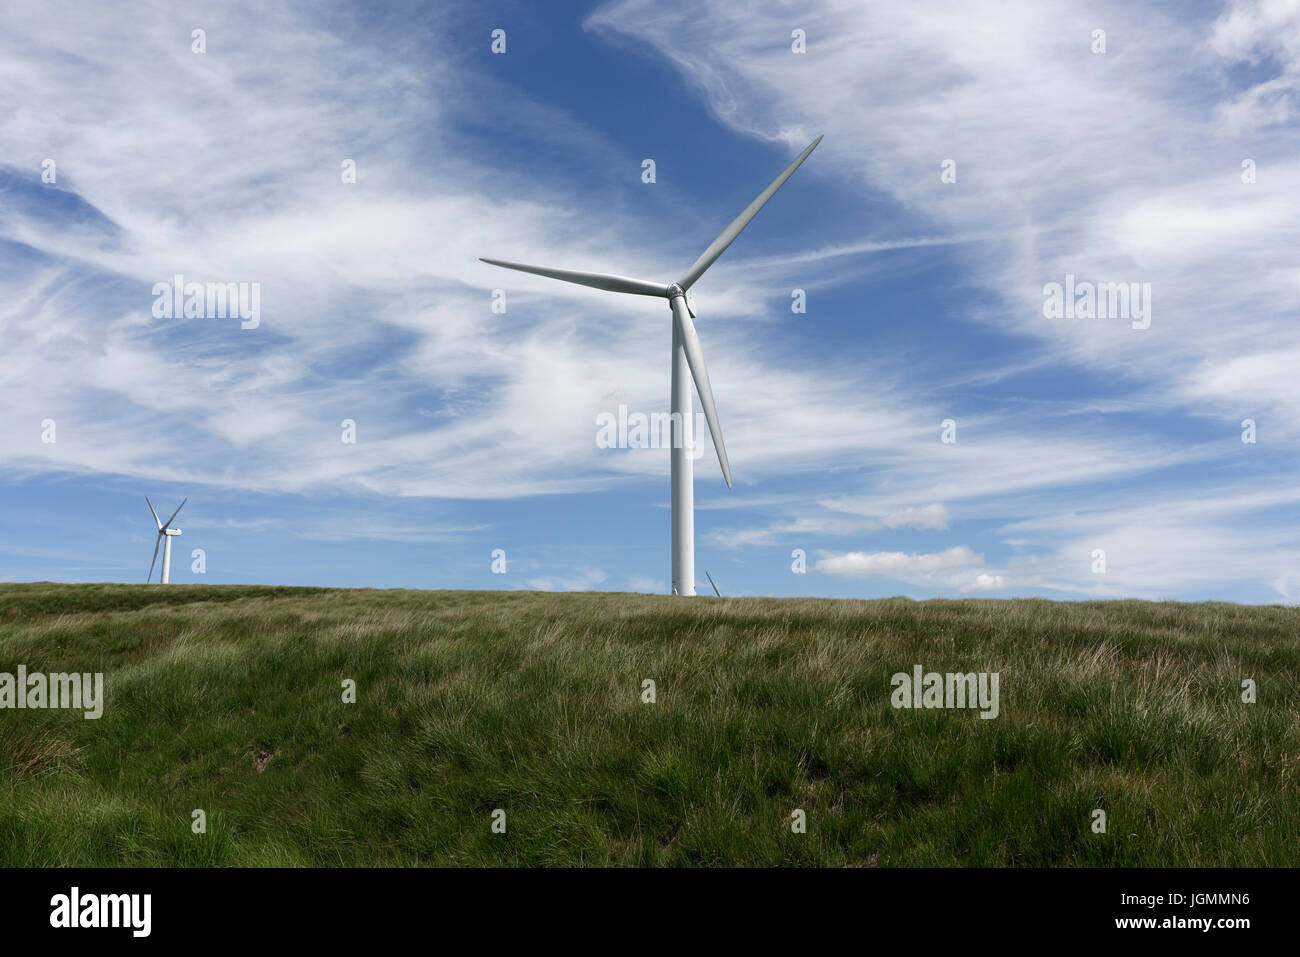 Wind turbine a source of renewable and sustainable energy at scout moor wind farm, with sky filled with wispy cirrus clouds above landscape uk Stock Photo